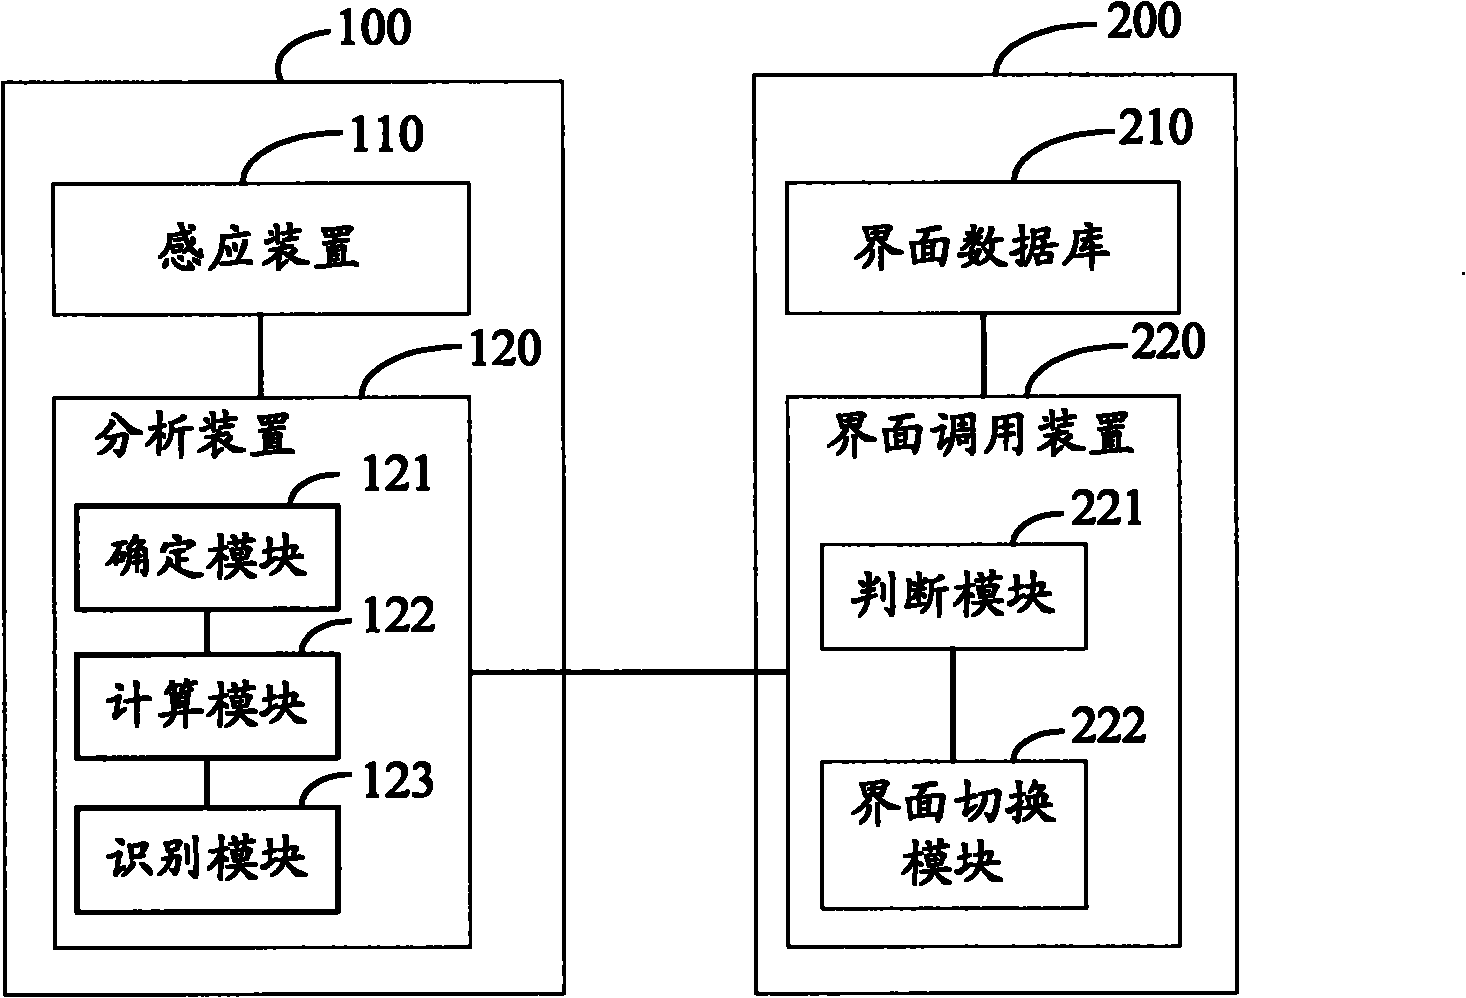 Mobile terminal user interface regulation system and method